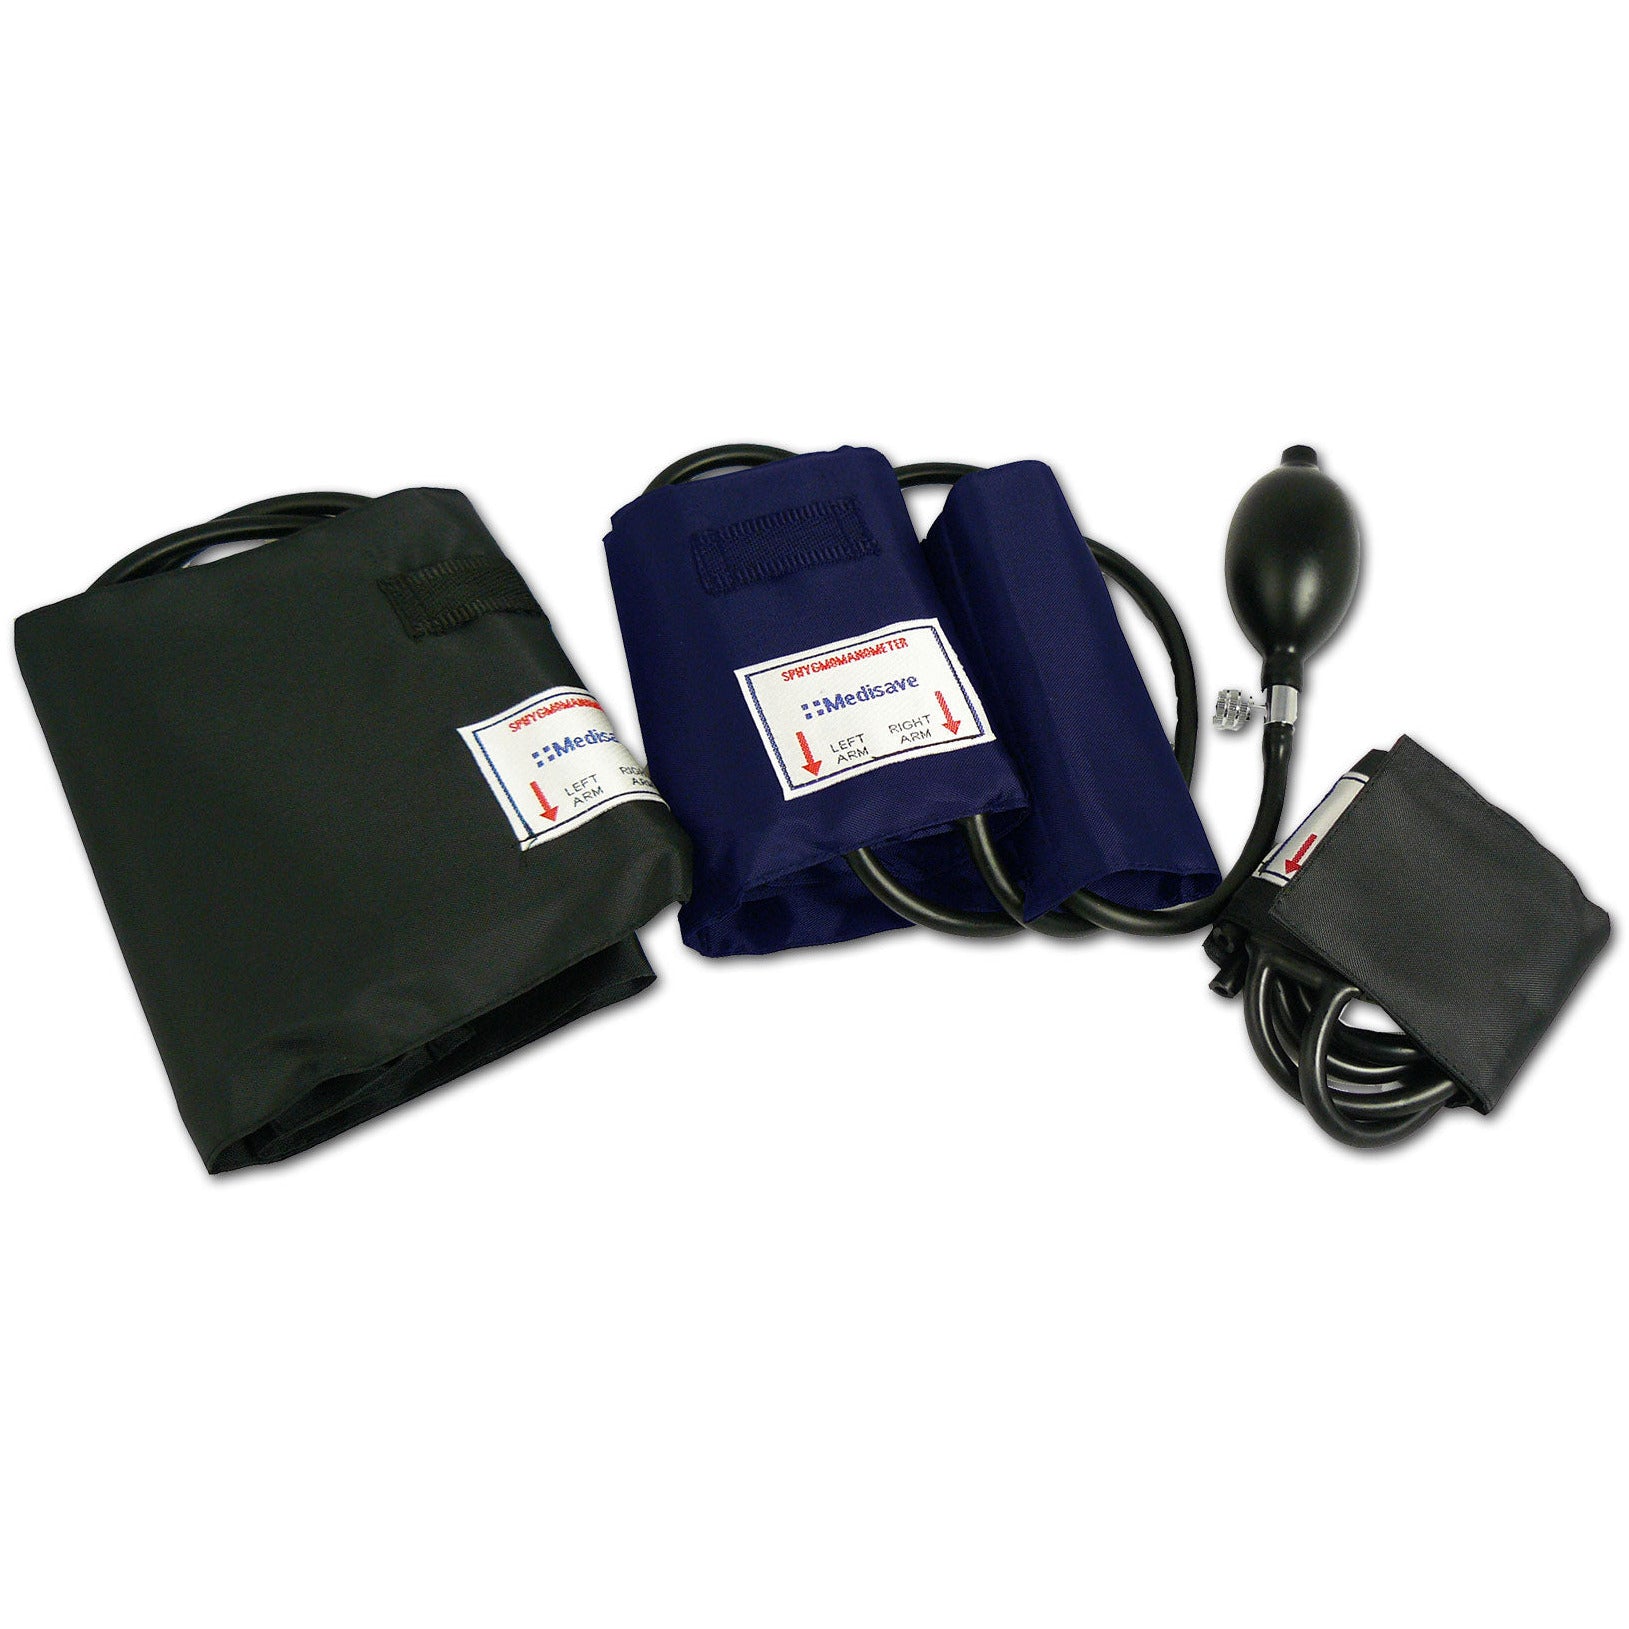 Aneroid Sphyg Family Practice Kit: Small